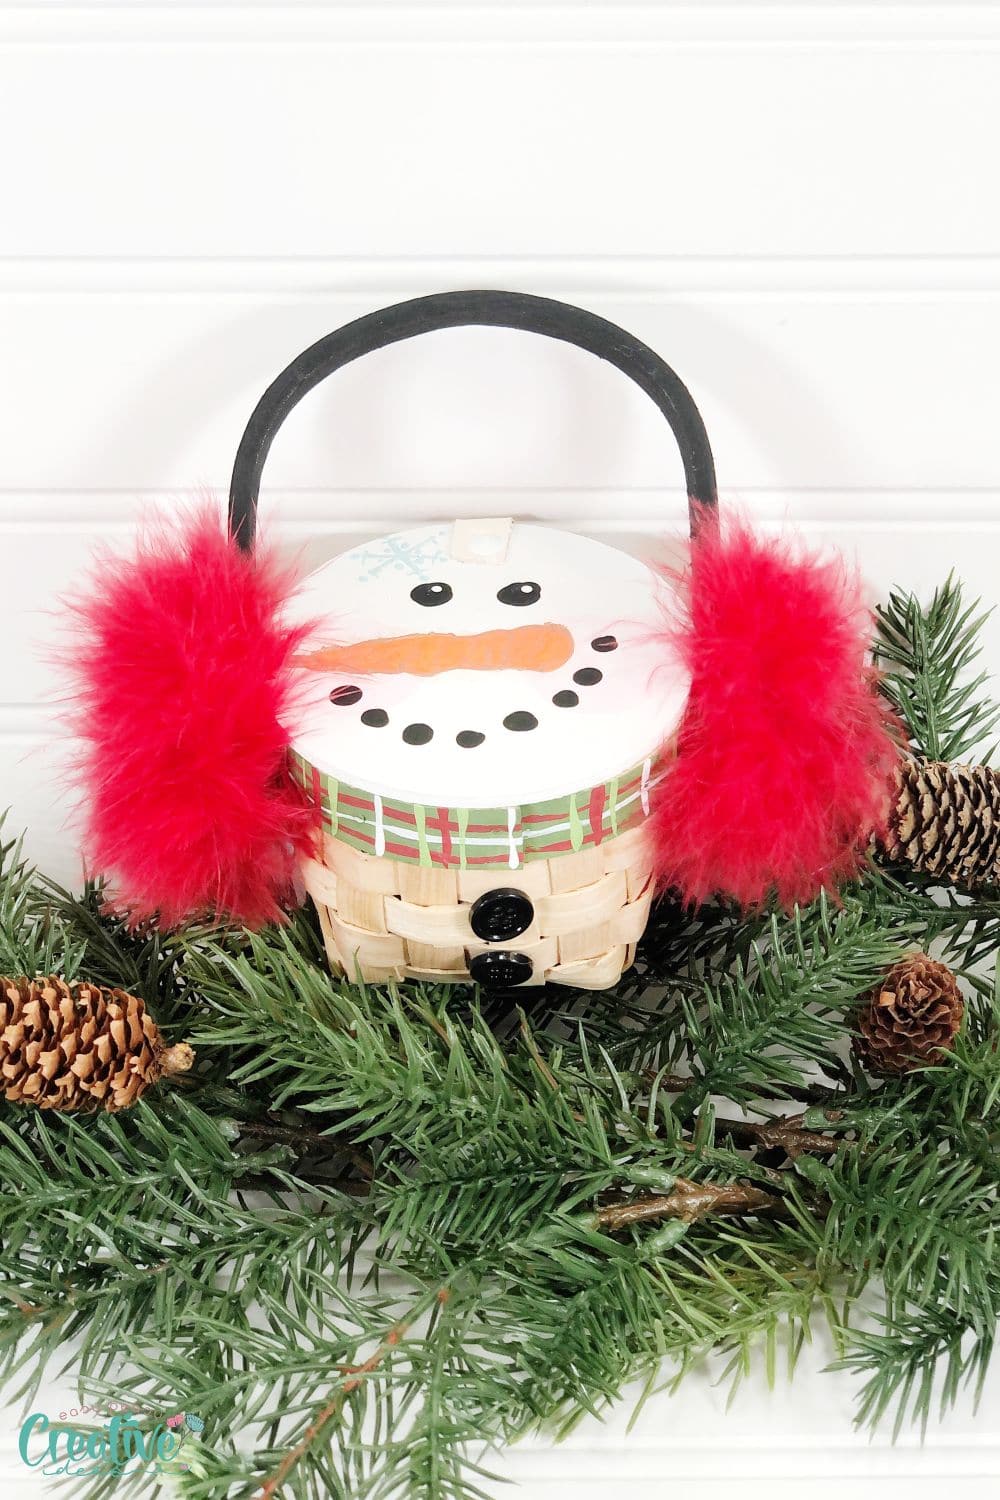 Fun and festive Snowman craft from a mini basket